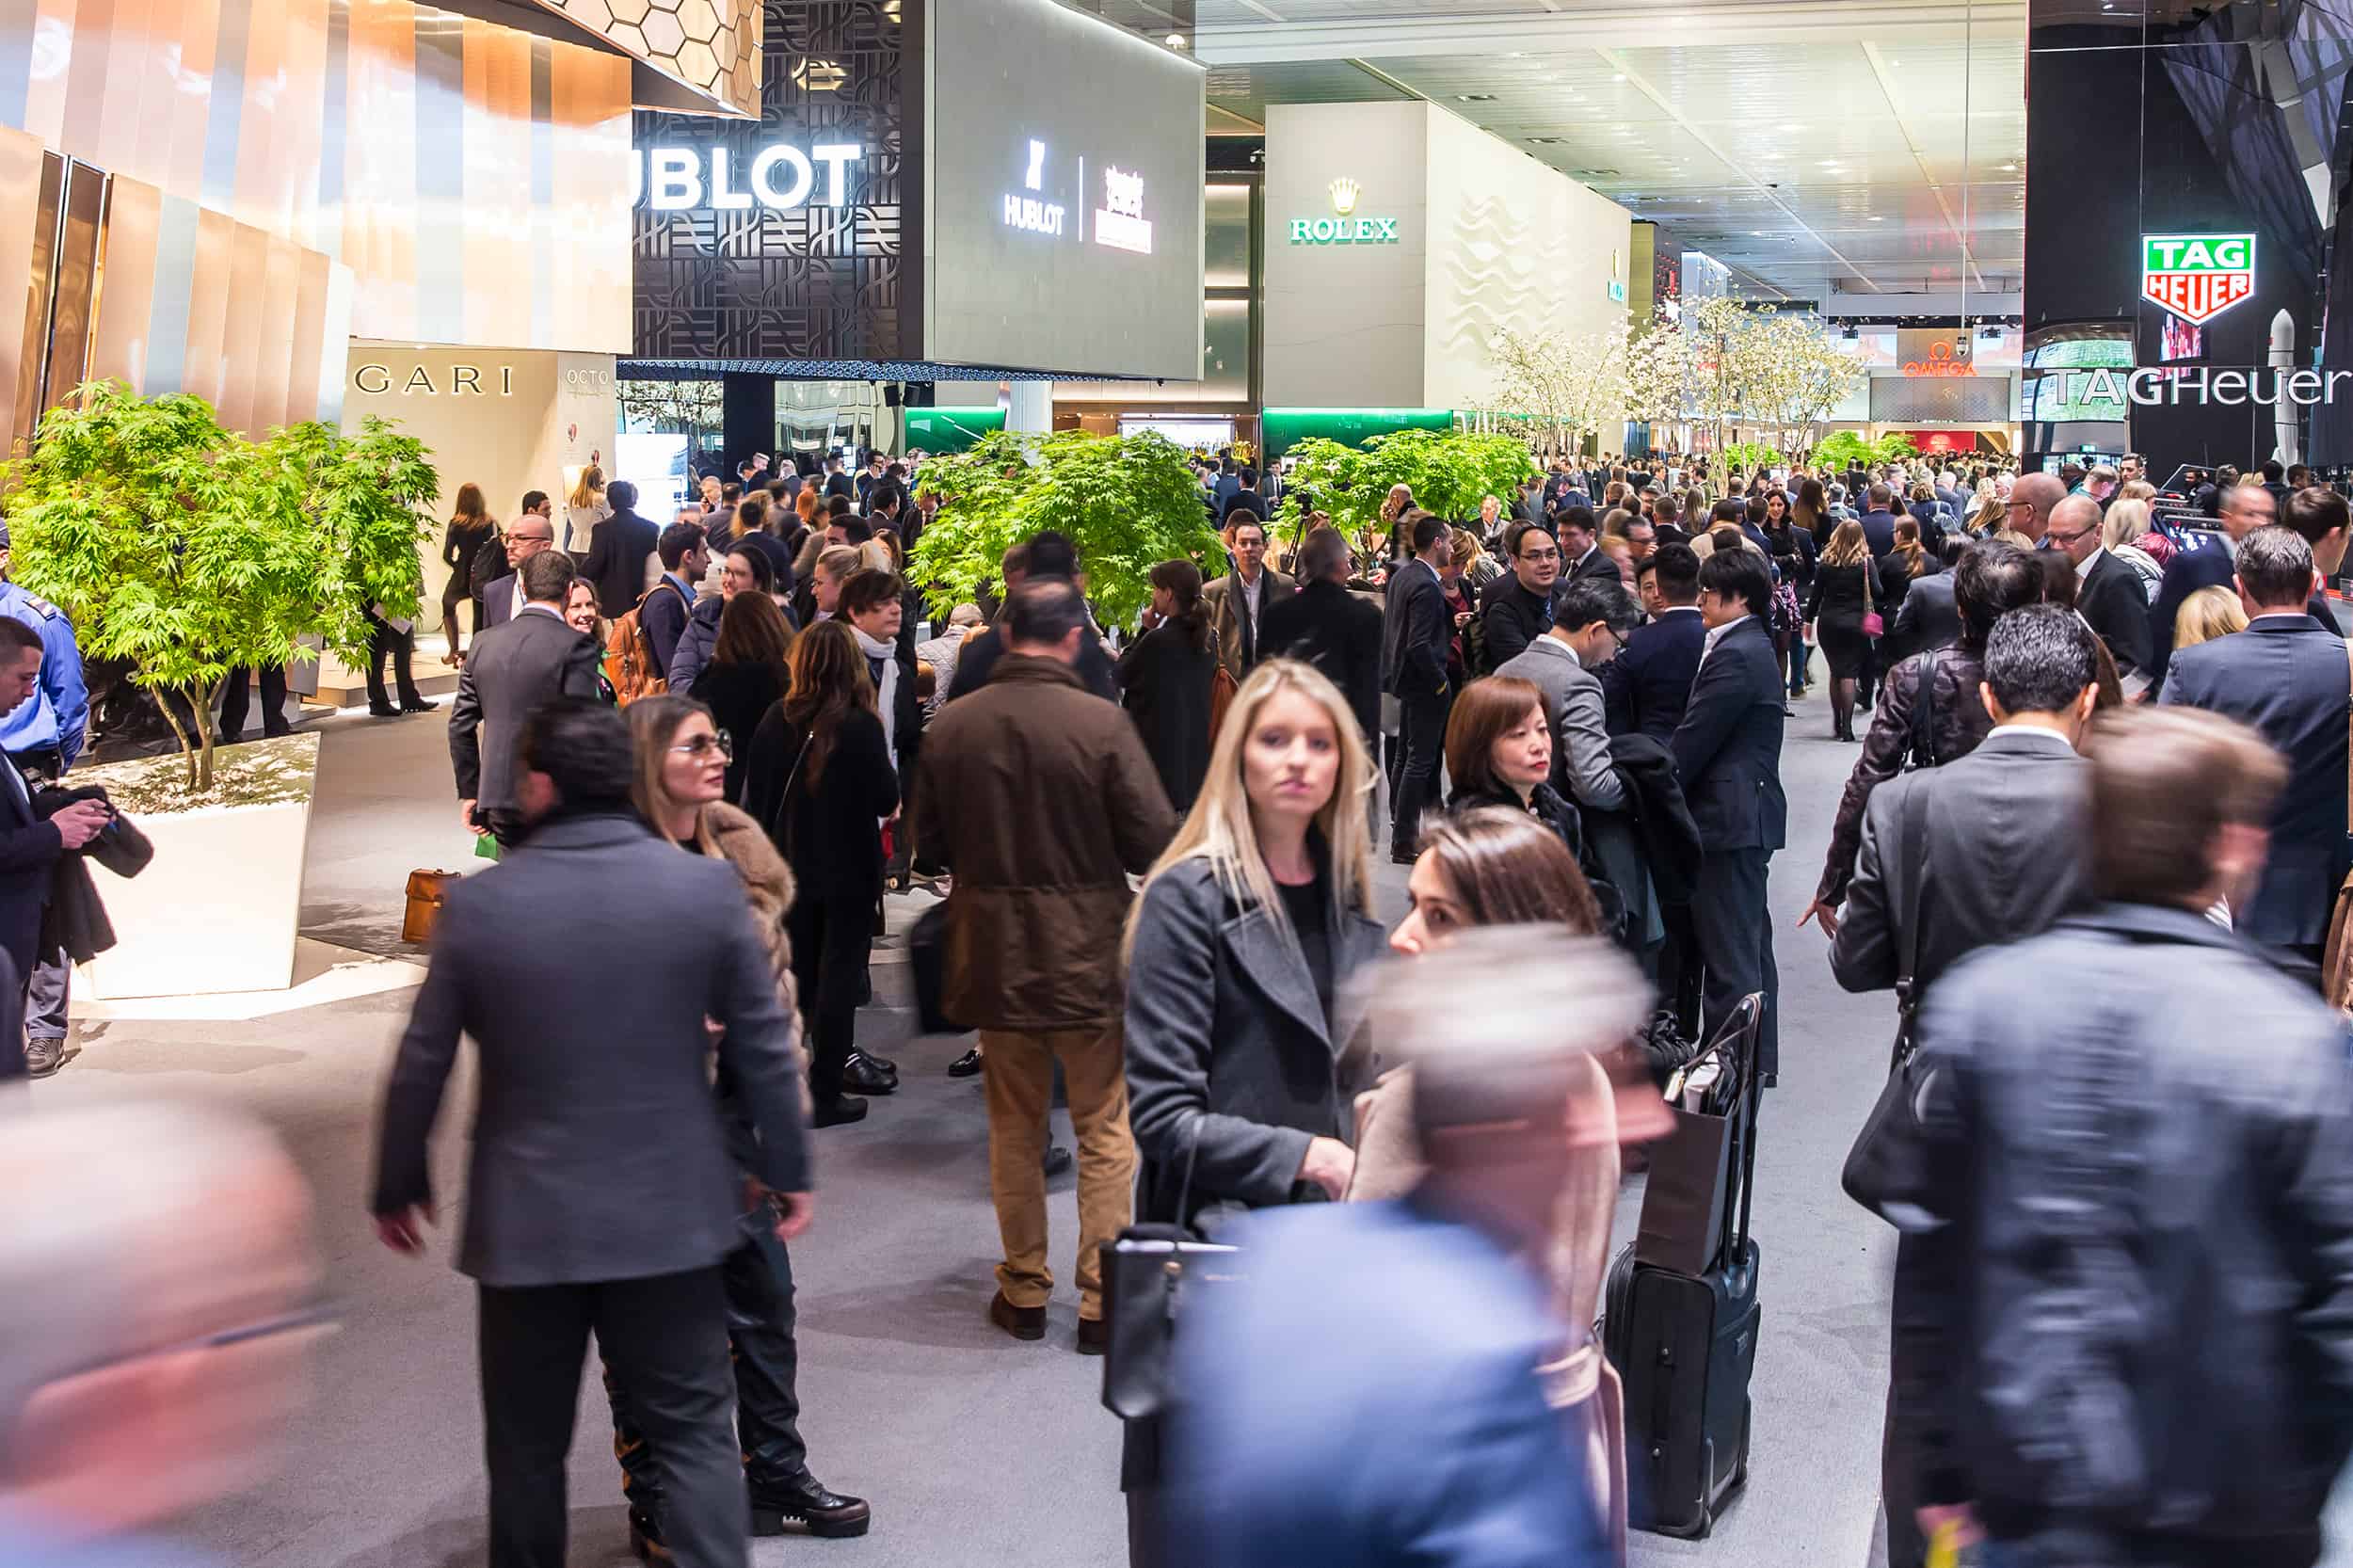 Baselworld and SIHH Team Up to Coordinate Their Shows Starting in 2020